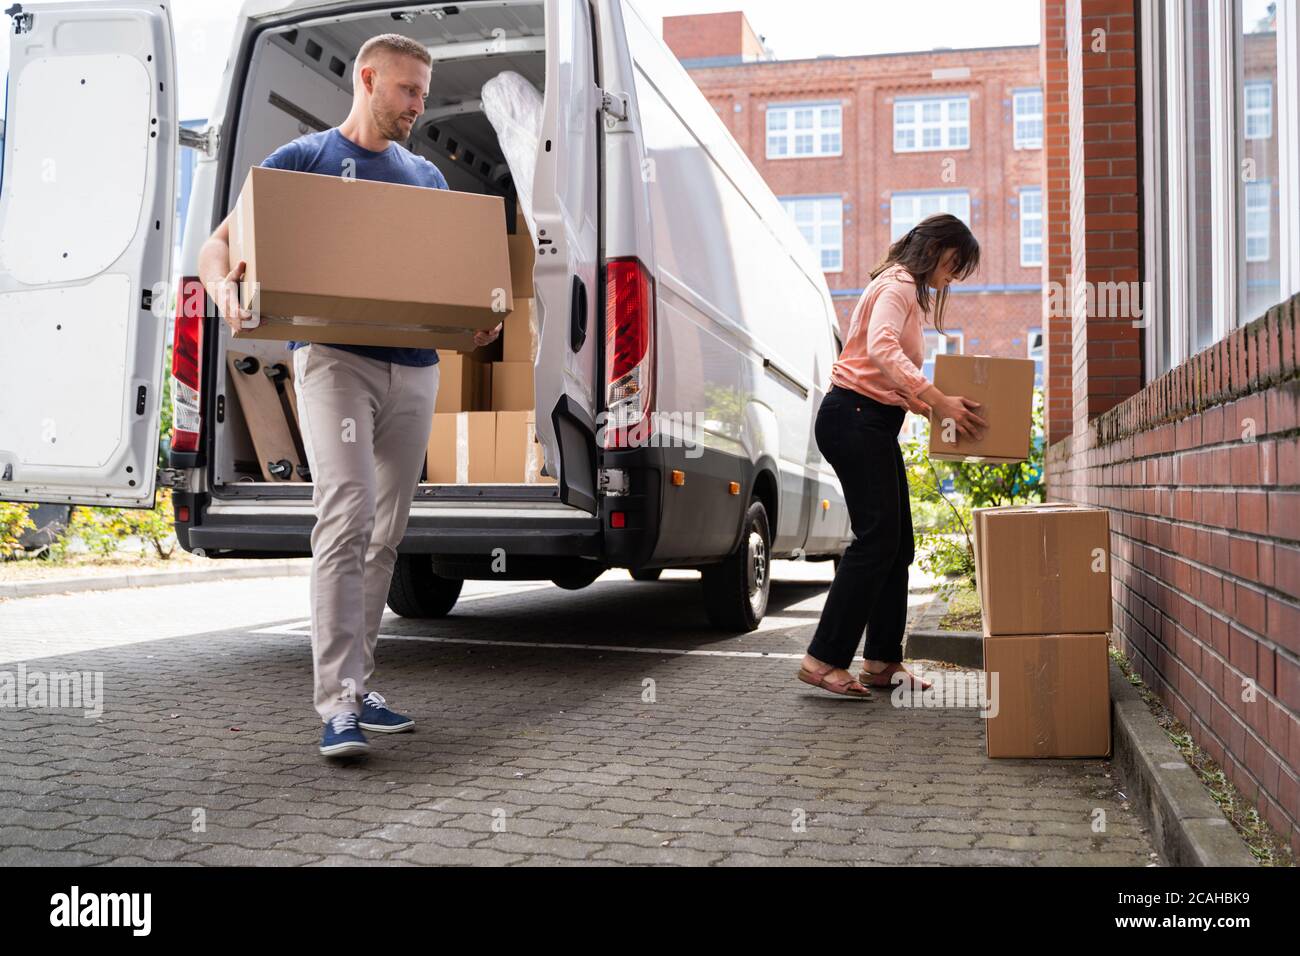 Couple Moving Boxes From Van Or Truck Together Outdoors Stock Photo